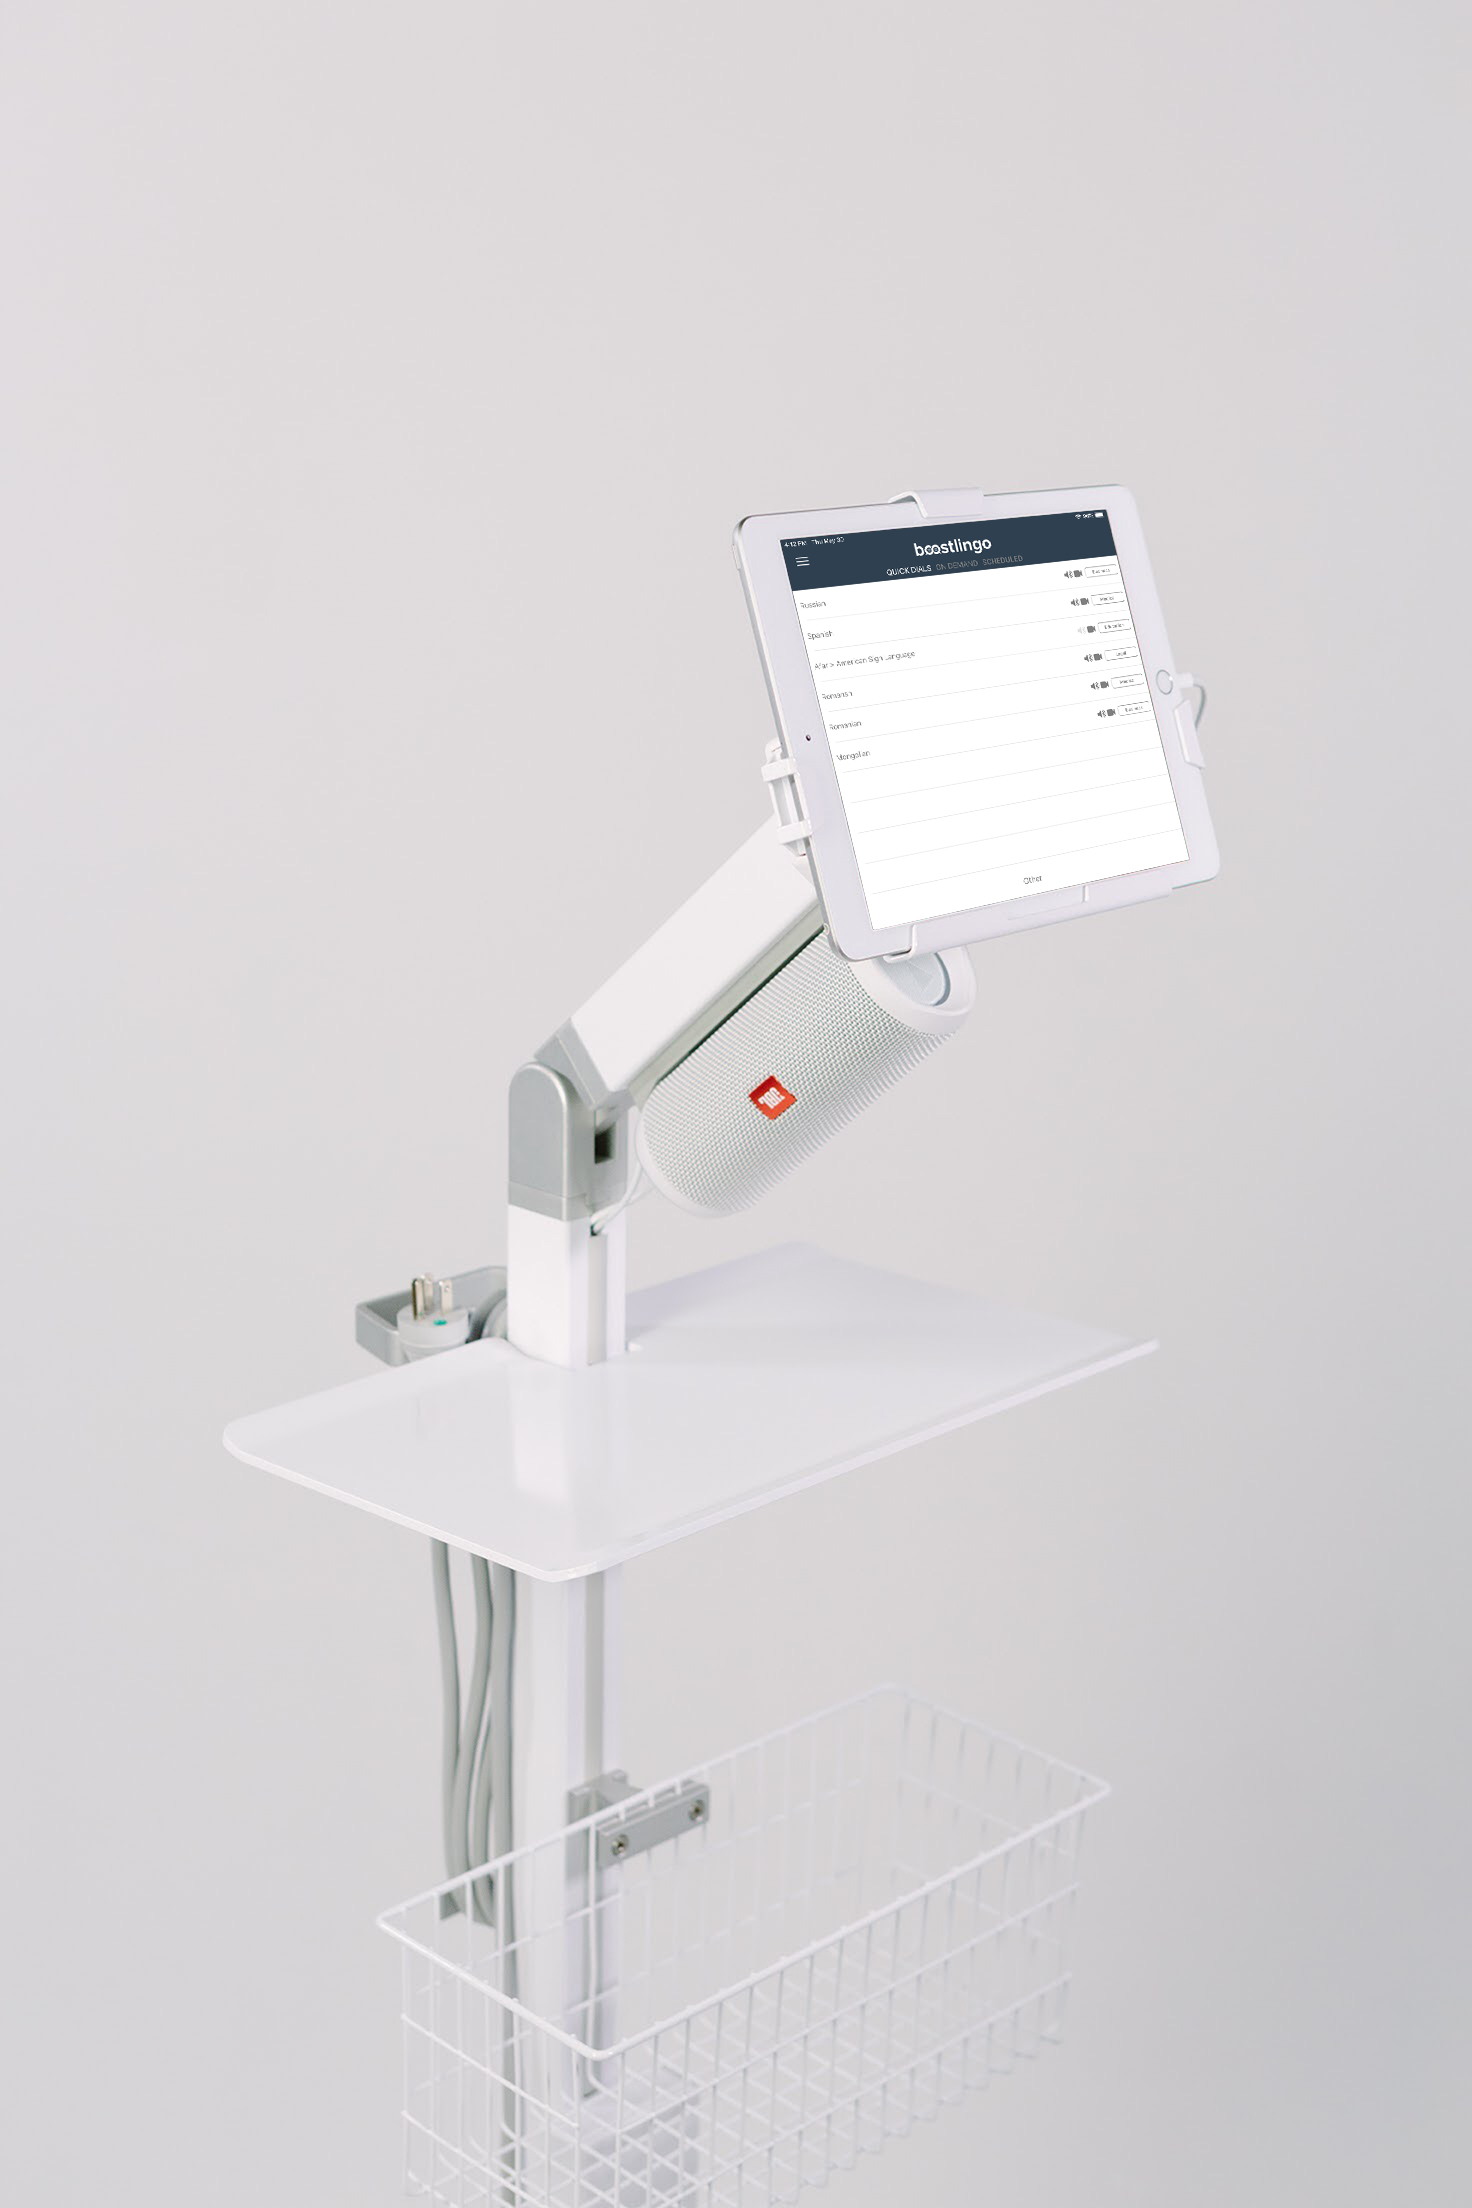 Best telehealth carts for hospitals by Boostlingo and Tryten